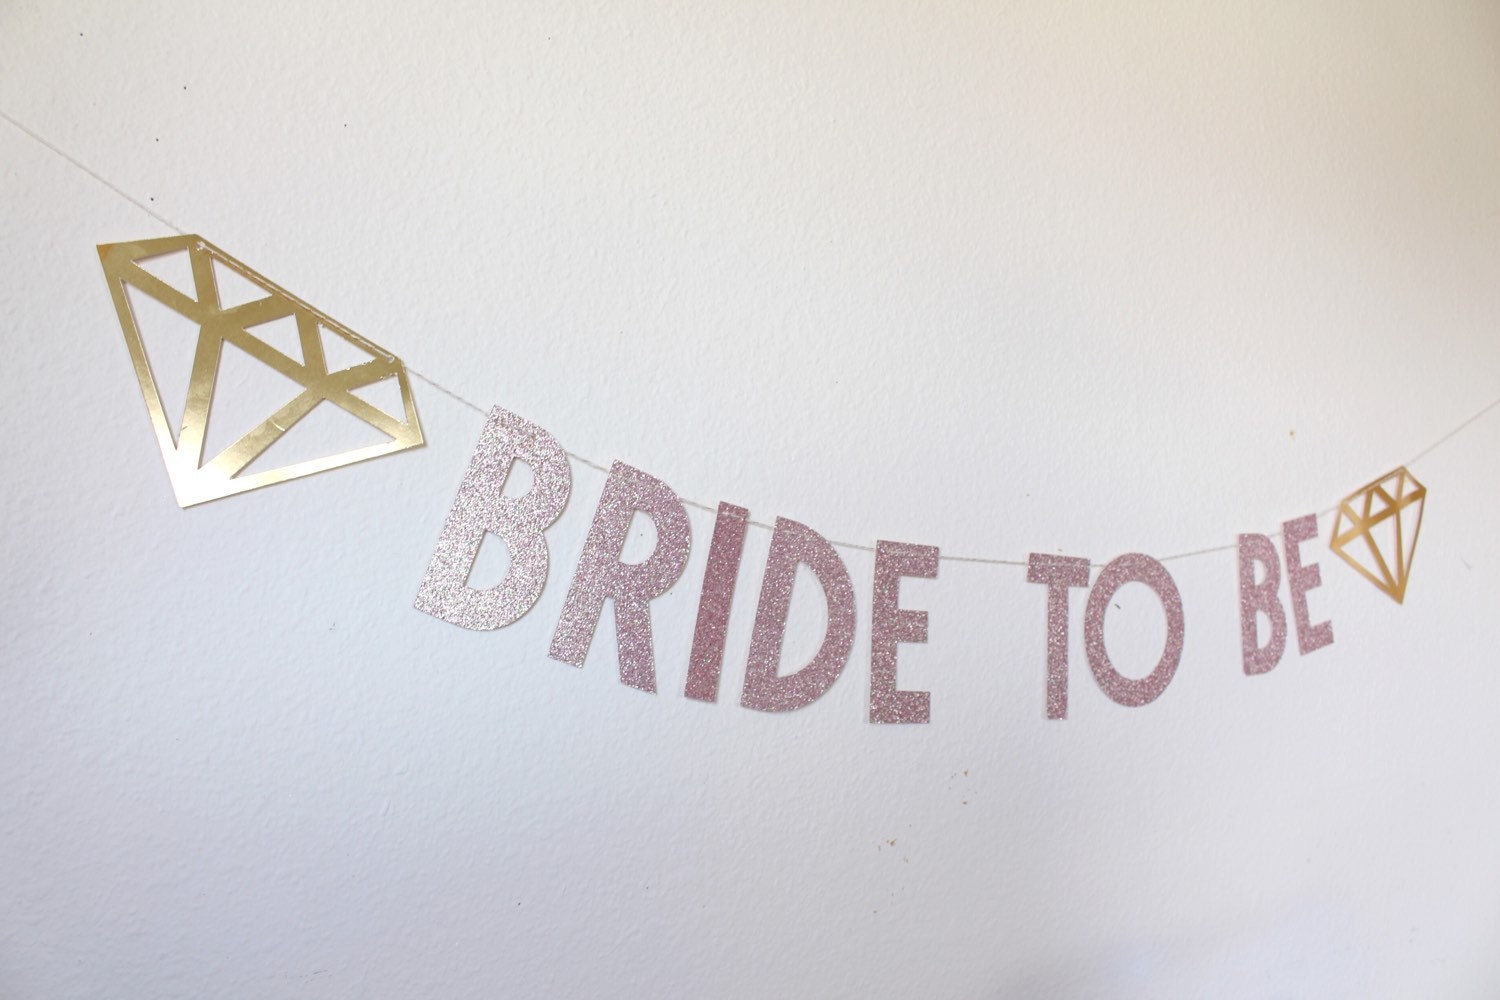 Glitter Bride To Be Banner for Bachelorette Party